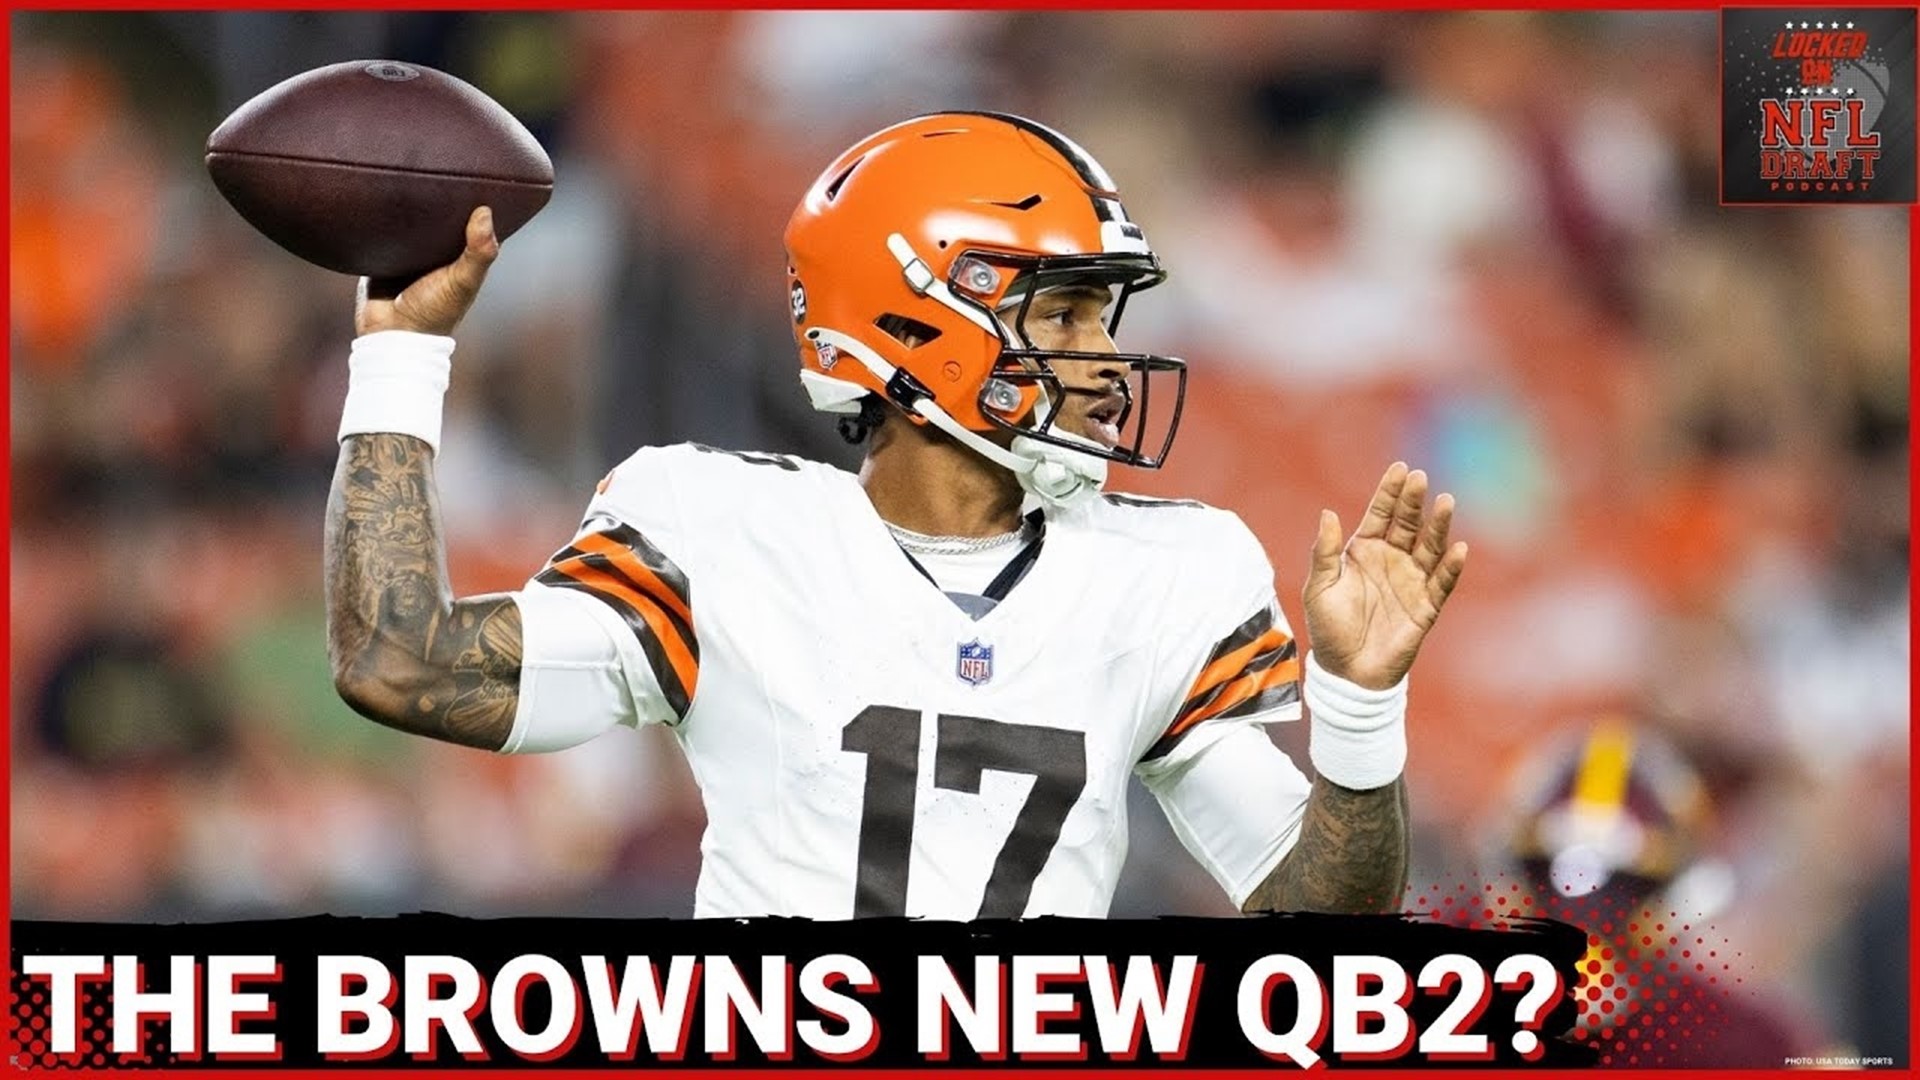 cleveland browns podcast